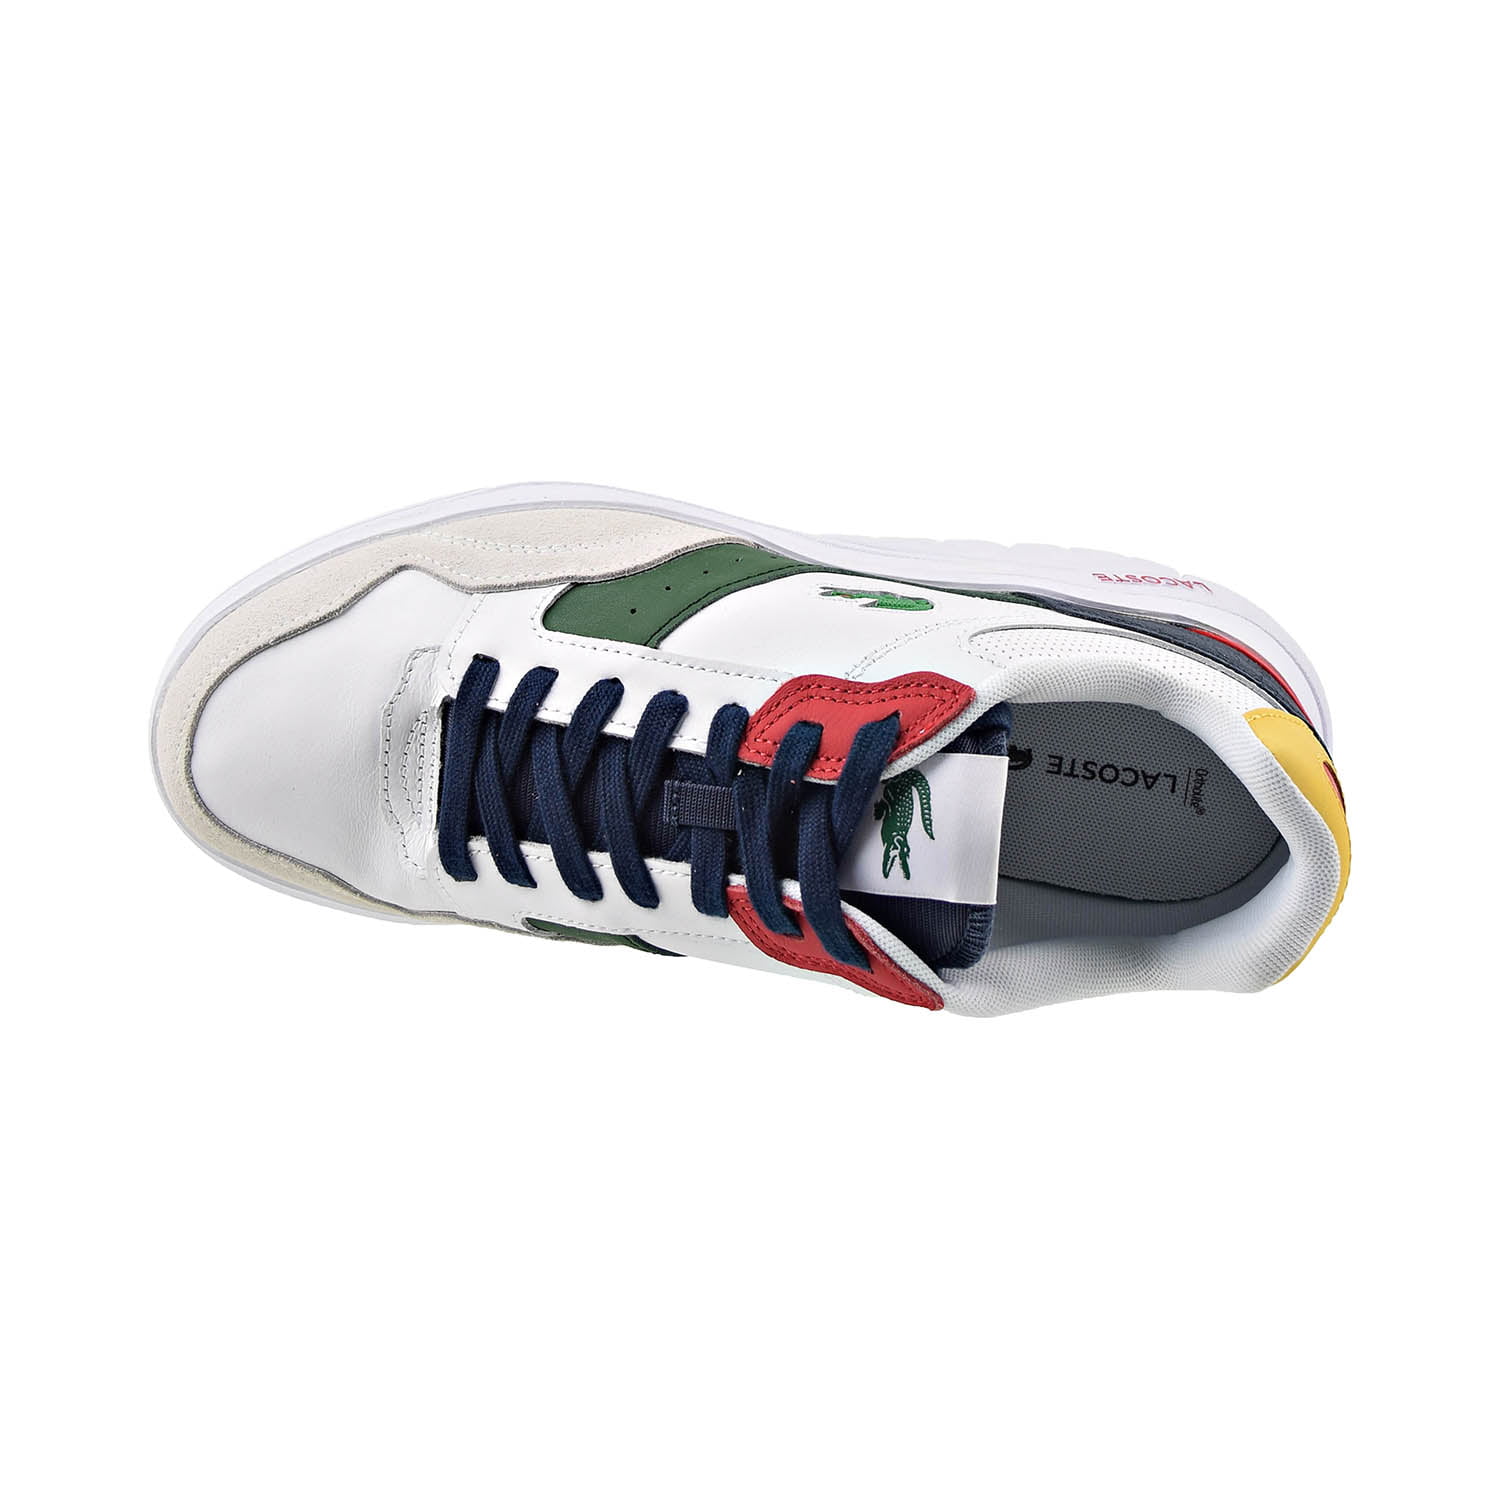 Lacoste Game Advance Luxe 0721 1 SMA Mens Size 13 Off White Trainers NEW  w/box